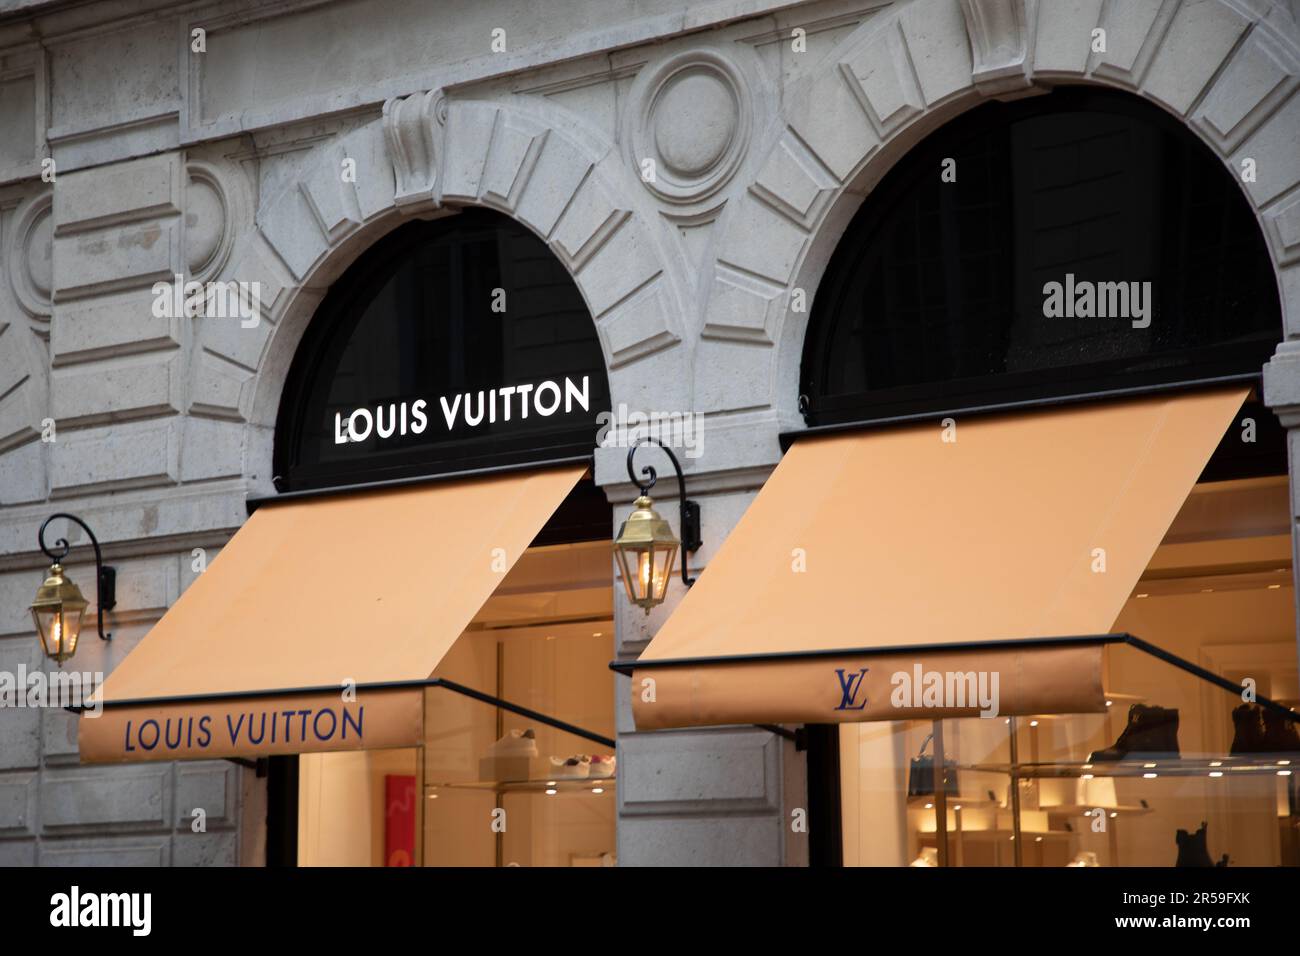 Facade of Louis Vuitton Store in the Center Editorial Photography - Image  of luxury, building: 174284412